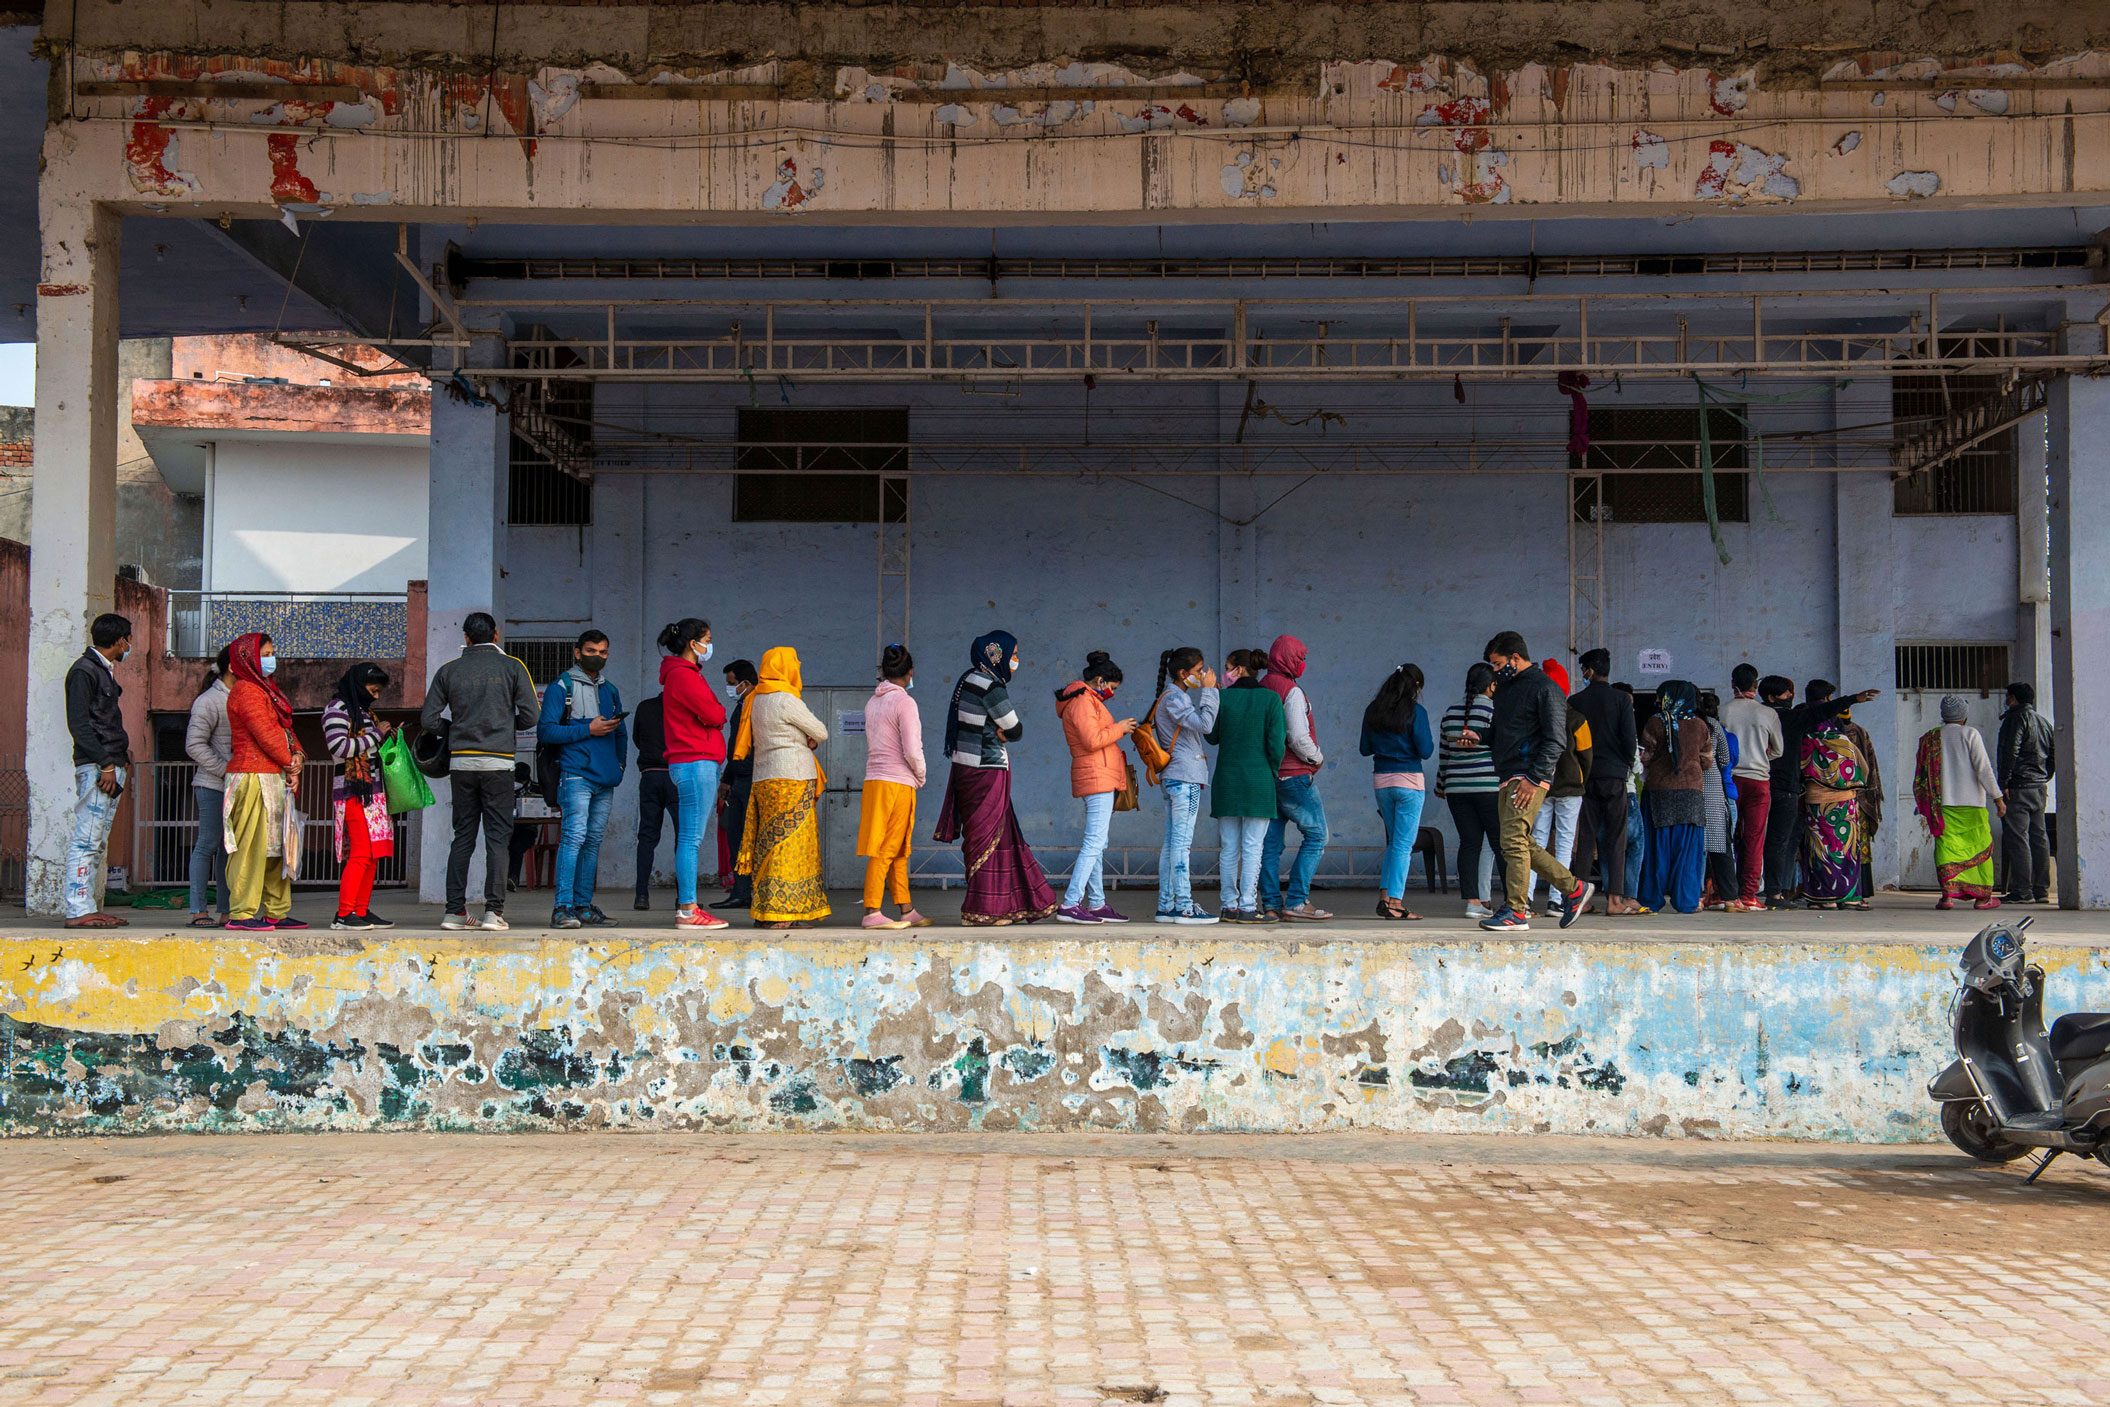 People line up to get vaccinated outside the Government Covid vaccination center in Ghaziabad, India, on January 12.